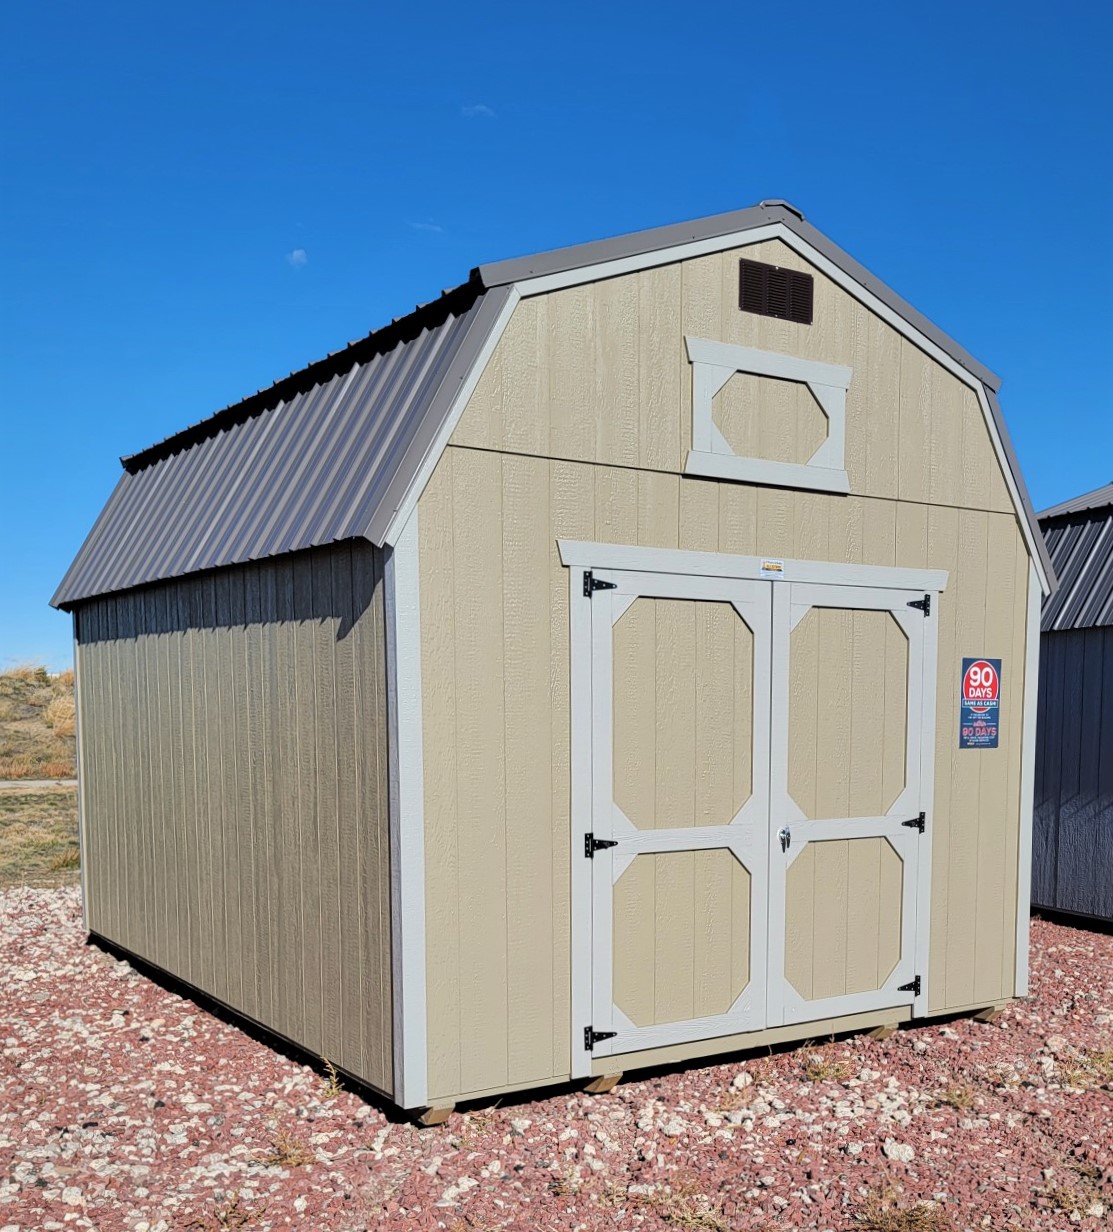 12x16 Painted Lofted Barn Shed | Casper's Sheds For Sale